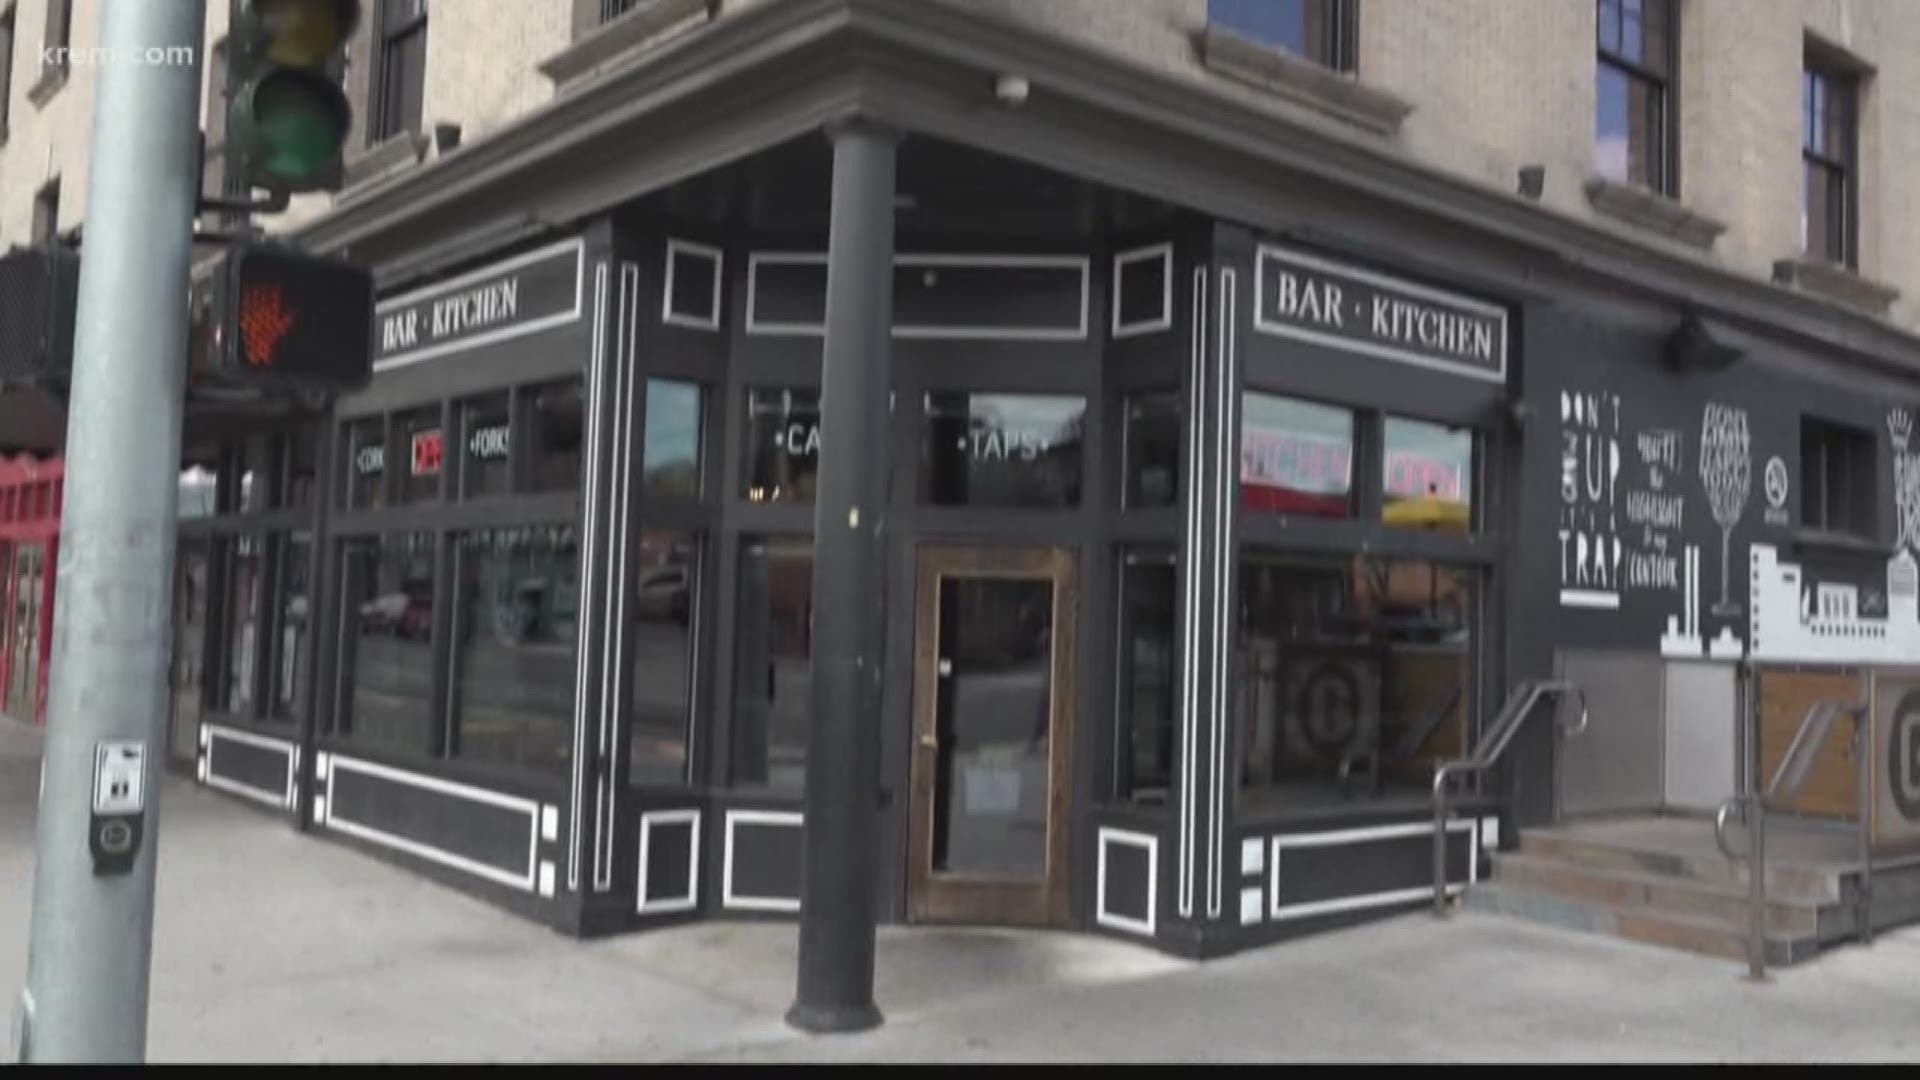 Gene Gallagher posted a sign outside Globe Bar & Kitchen addressing drink tampering issues and the bar announced new drink safety policies just a few days later.